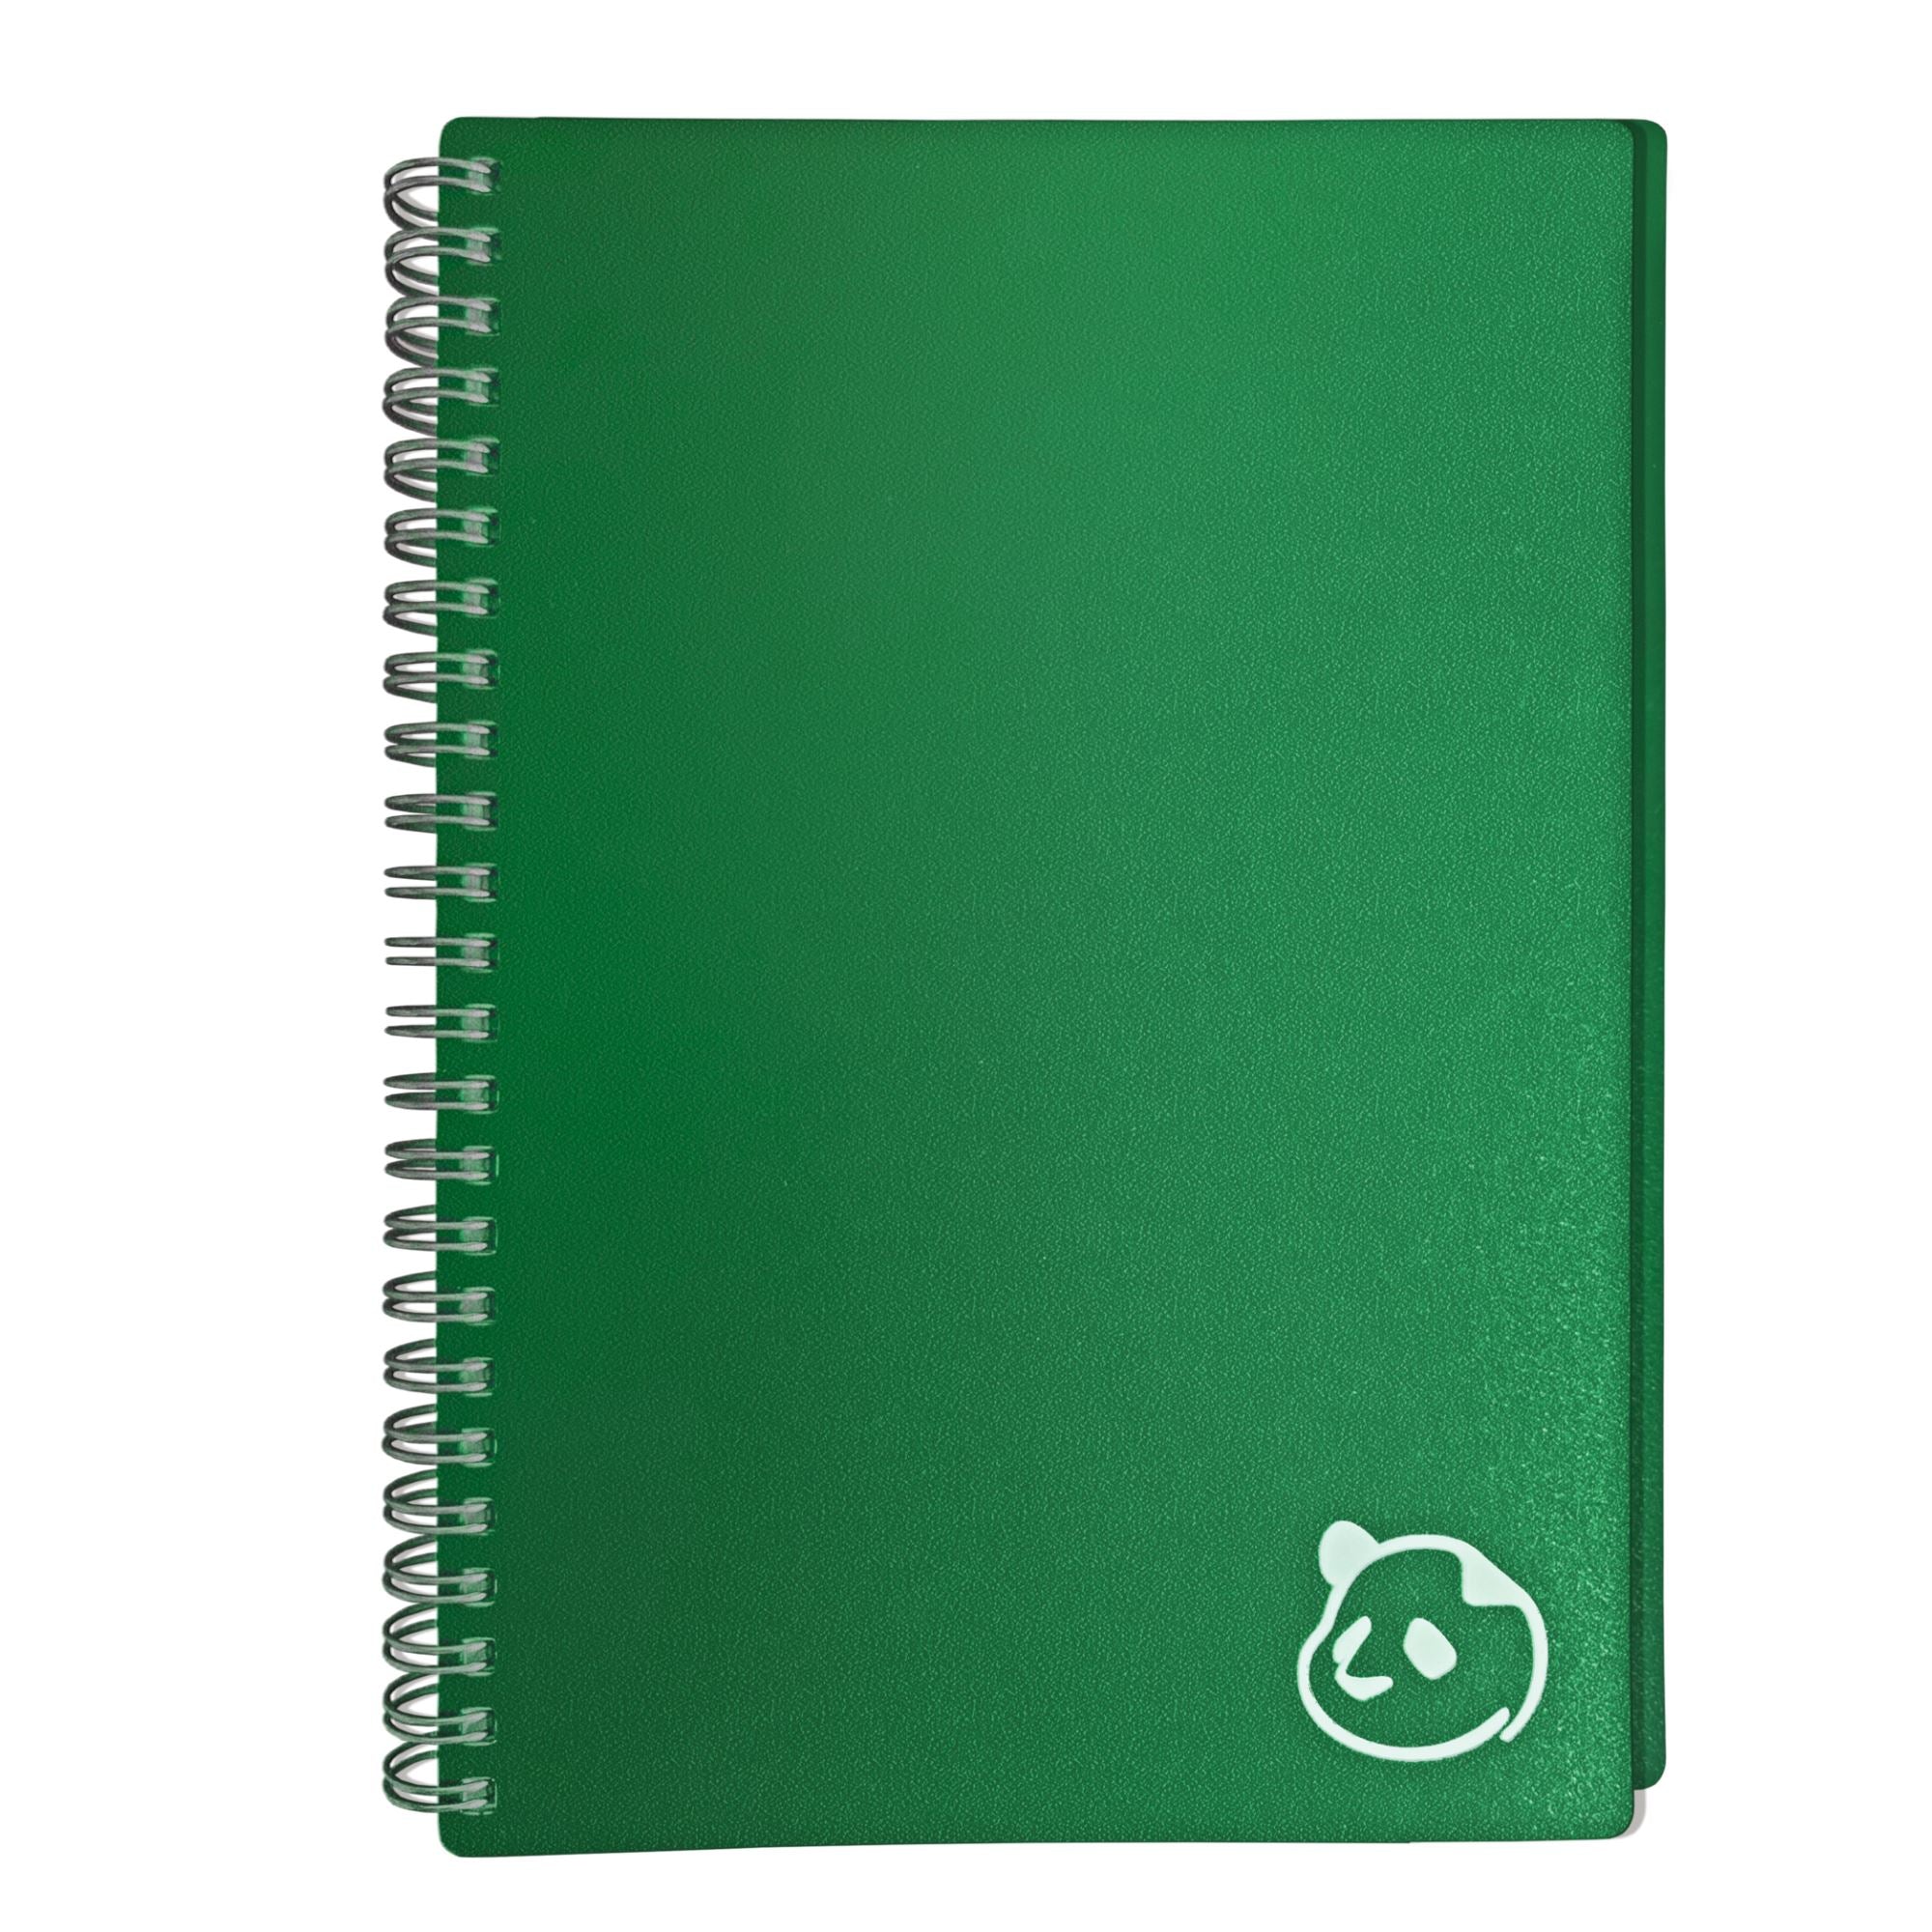 3 Month Student Edition – Removable Dividers & Pen Loop Sticker Allows for the Ultimate Customization Daily Planner 2.0 5.75" x 8.25" Undated Green 